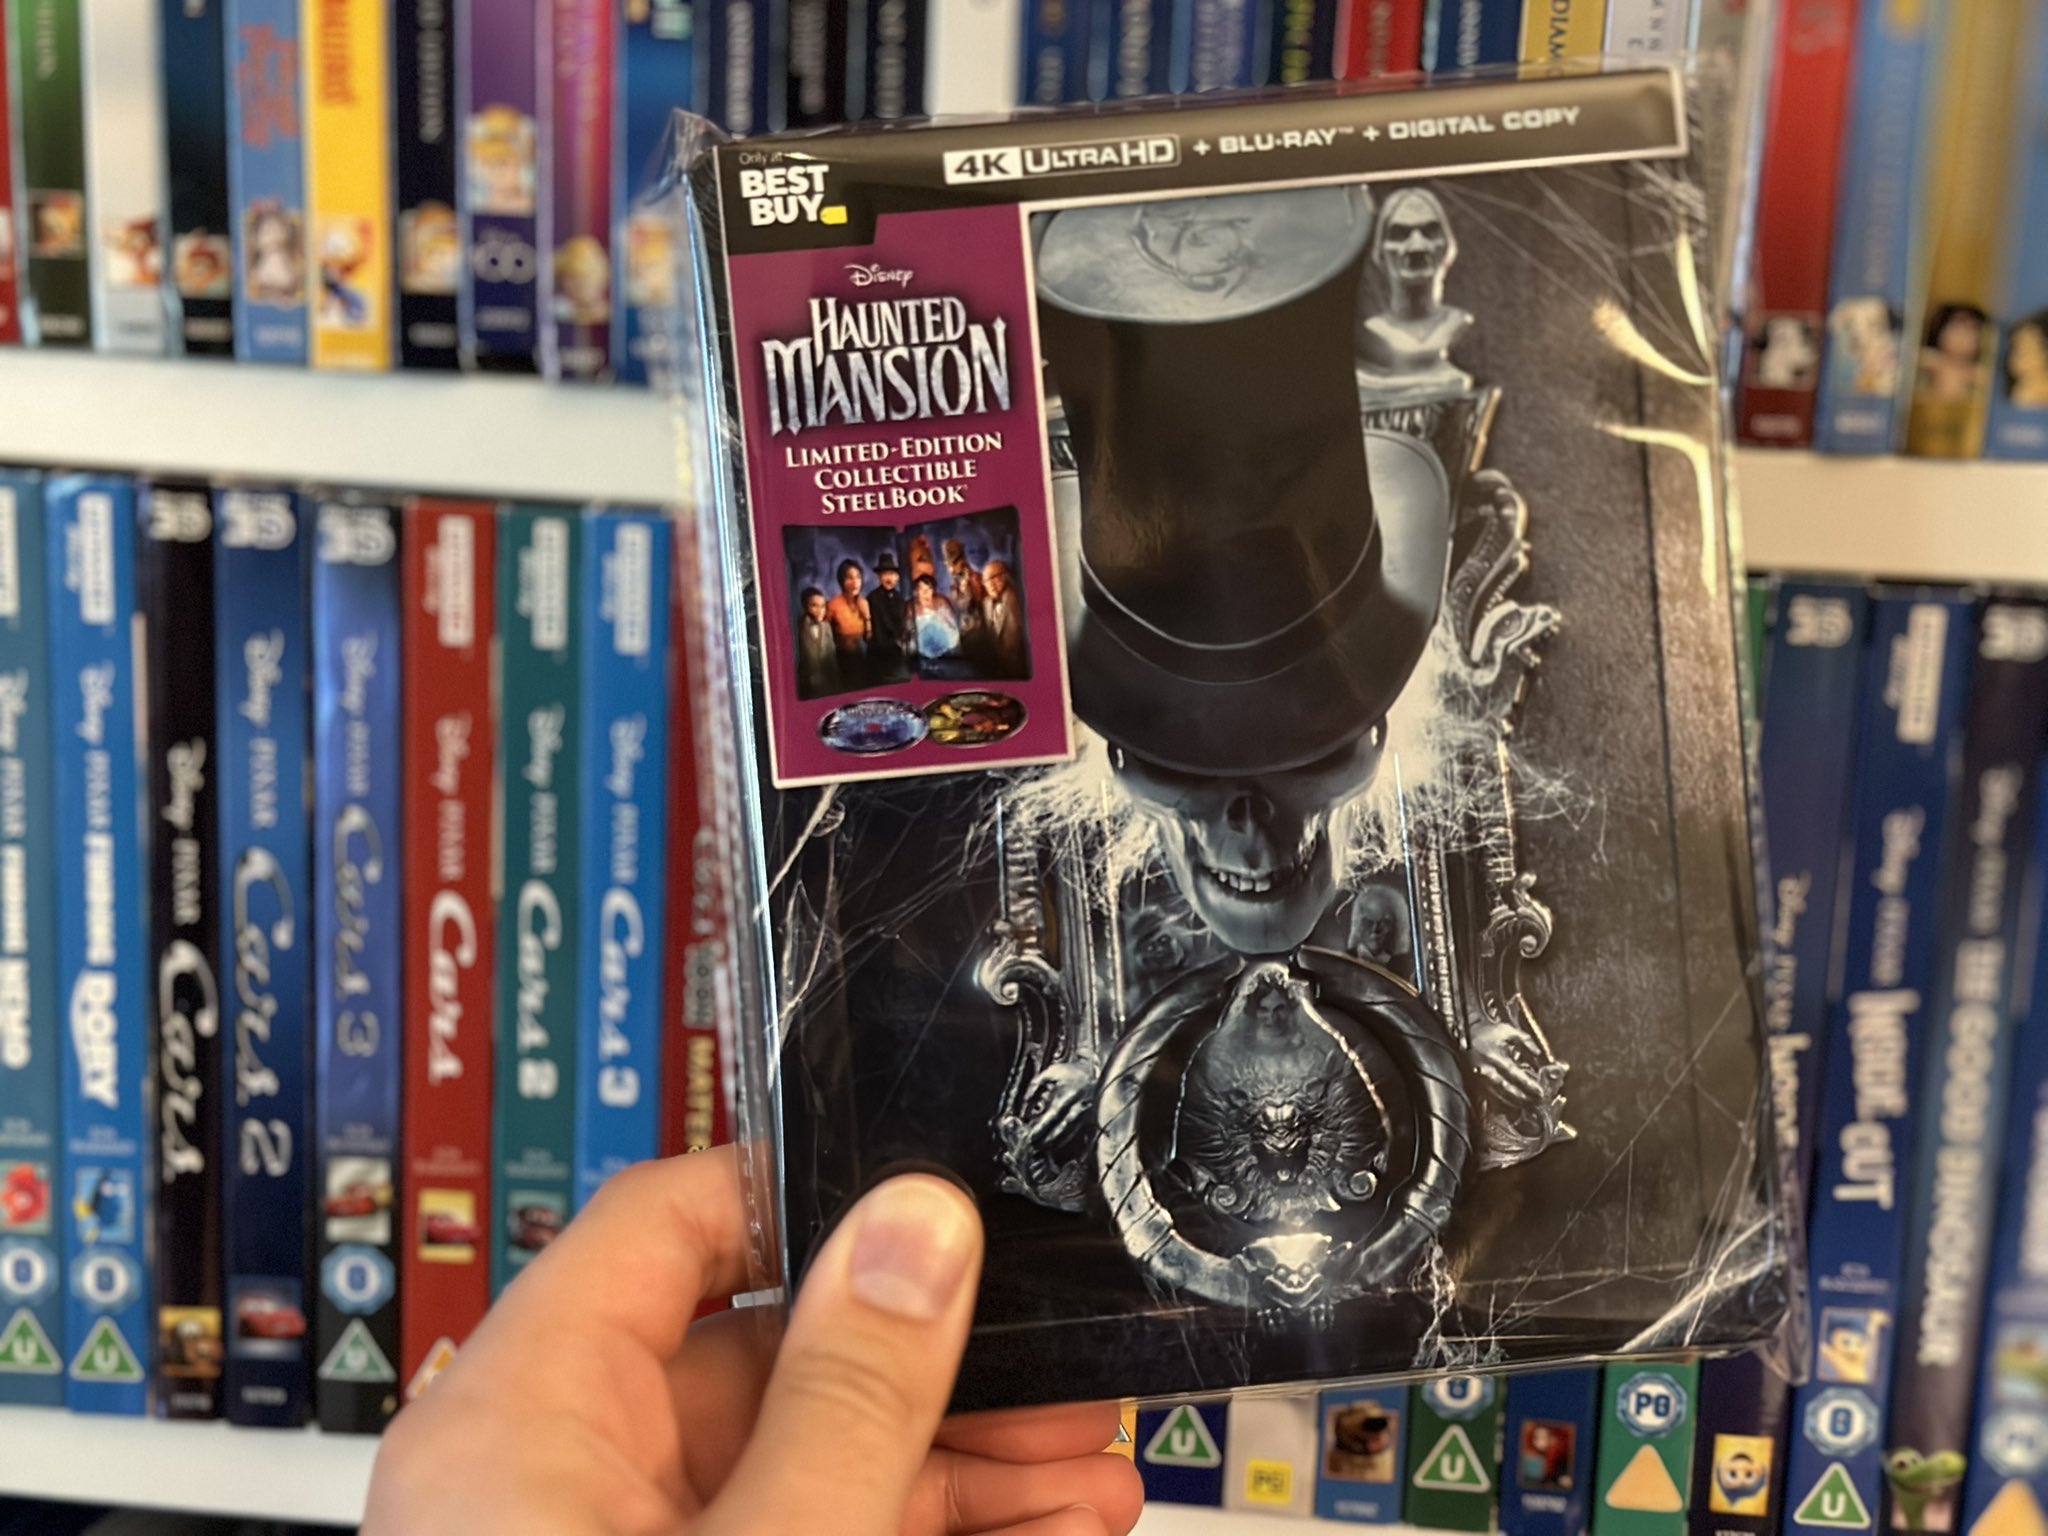 Dave Lee on X: Thanks to @disney for sending a copy of the upcoming @BestBuy  4K Blu-ray steelbook release of this year's #HauntedMansion! It's available  in the USA on 11/17. Can't wait